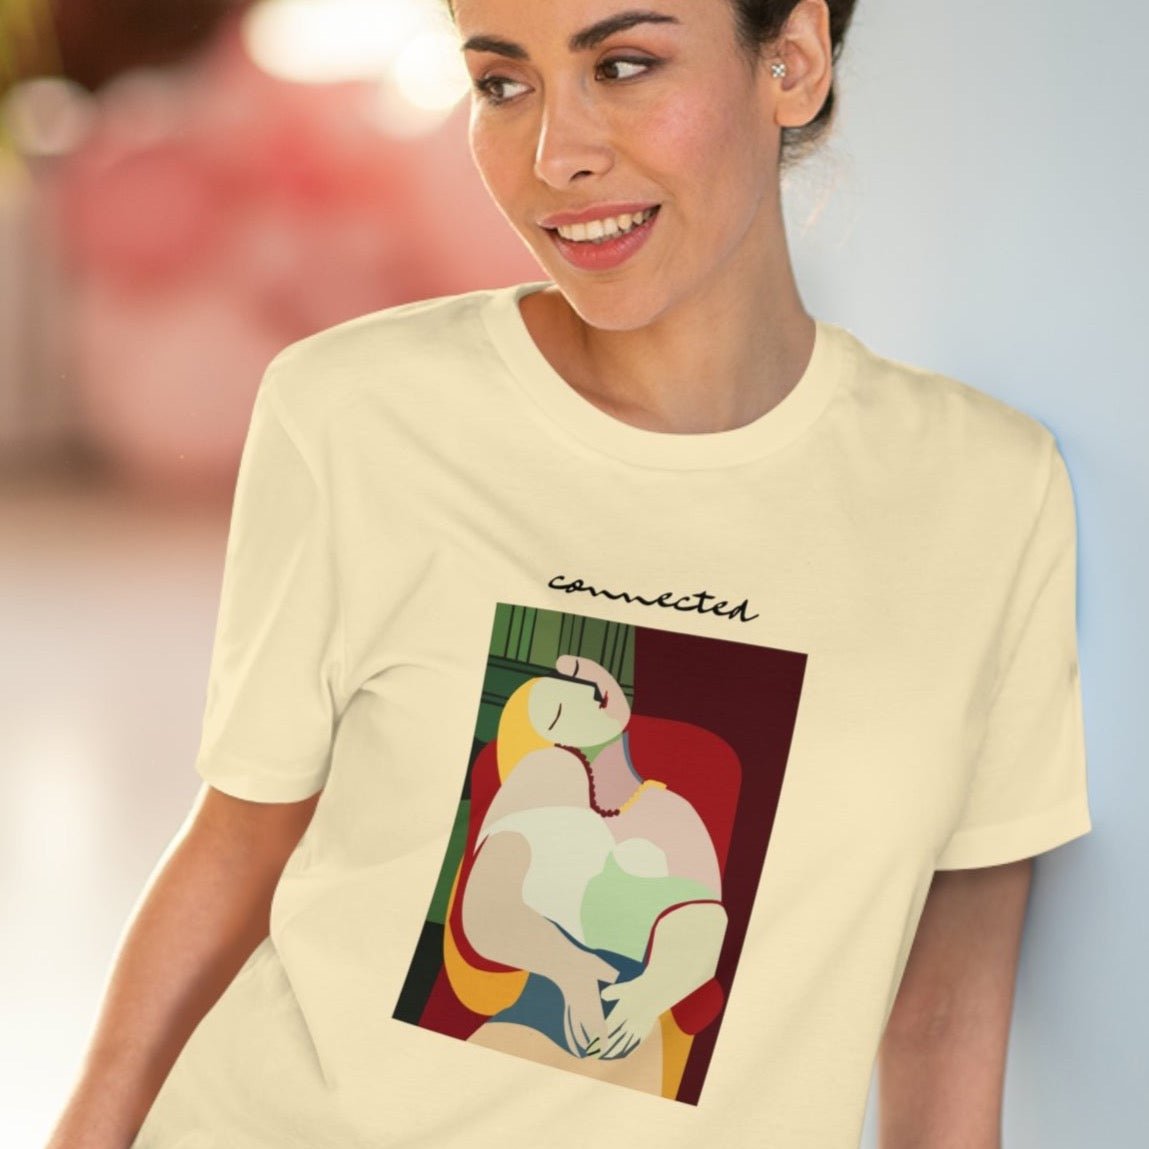 Feminist 'Connected' Organic Cotton T-shirt - Equality Tshirt